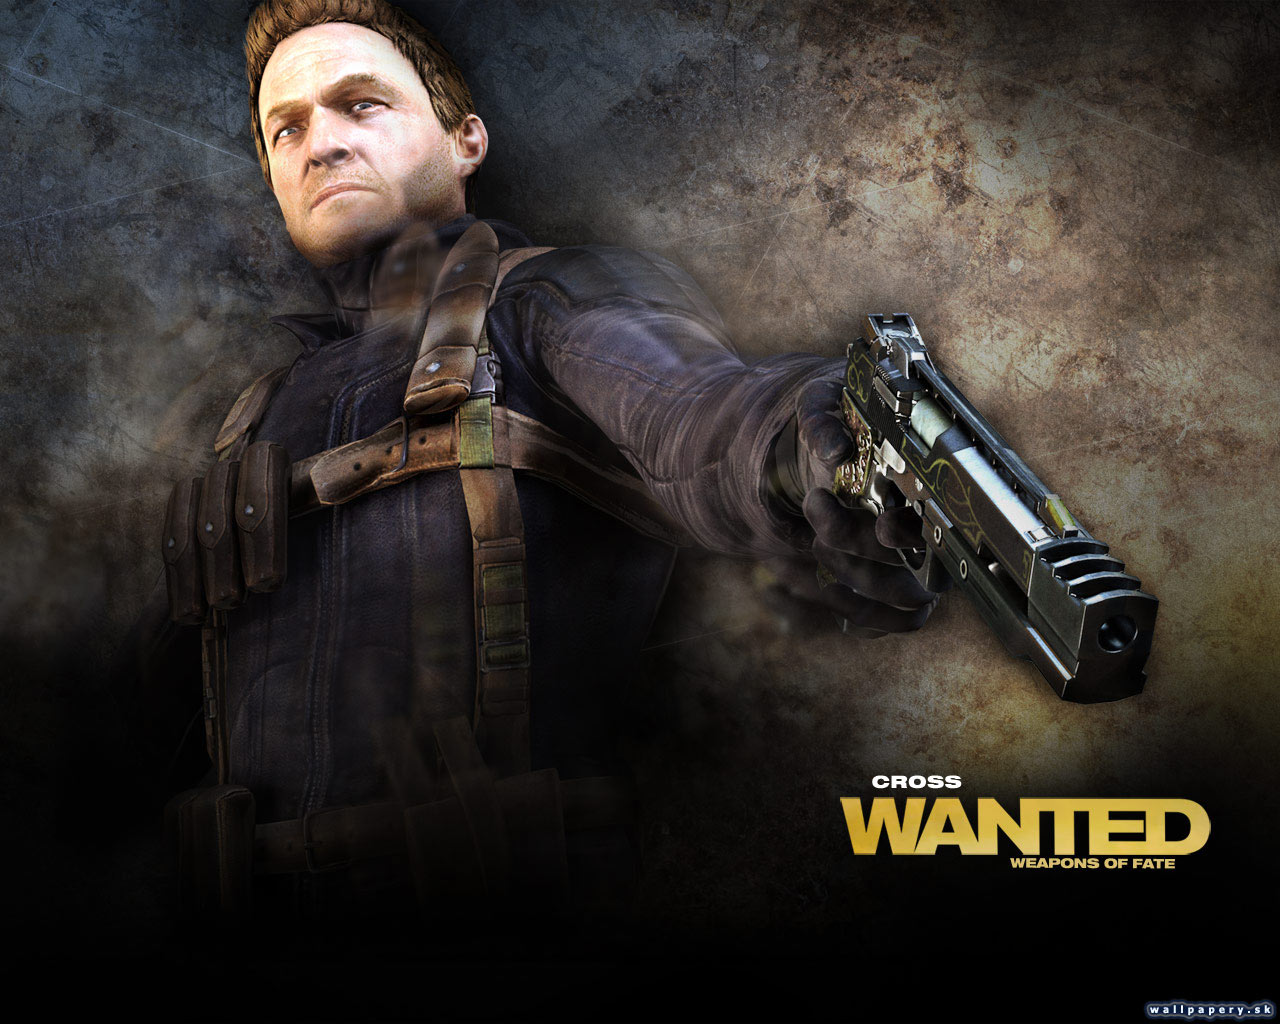 Wanted: Weapons of Fate - wallpaper 26